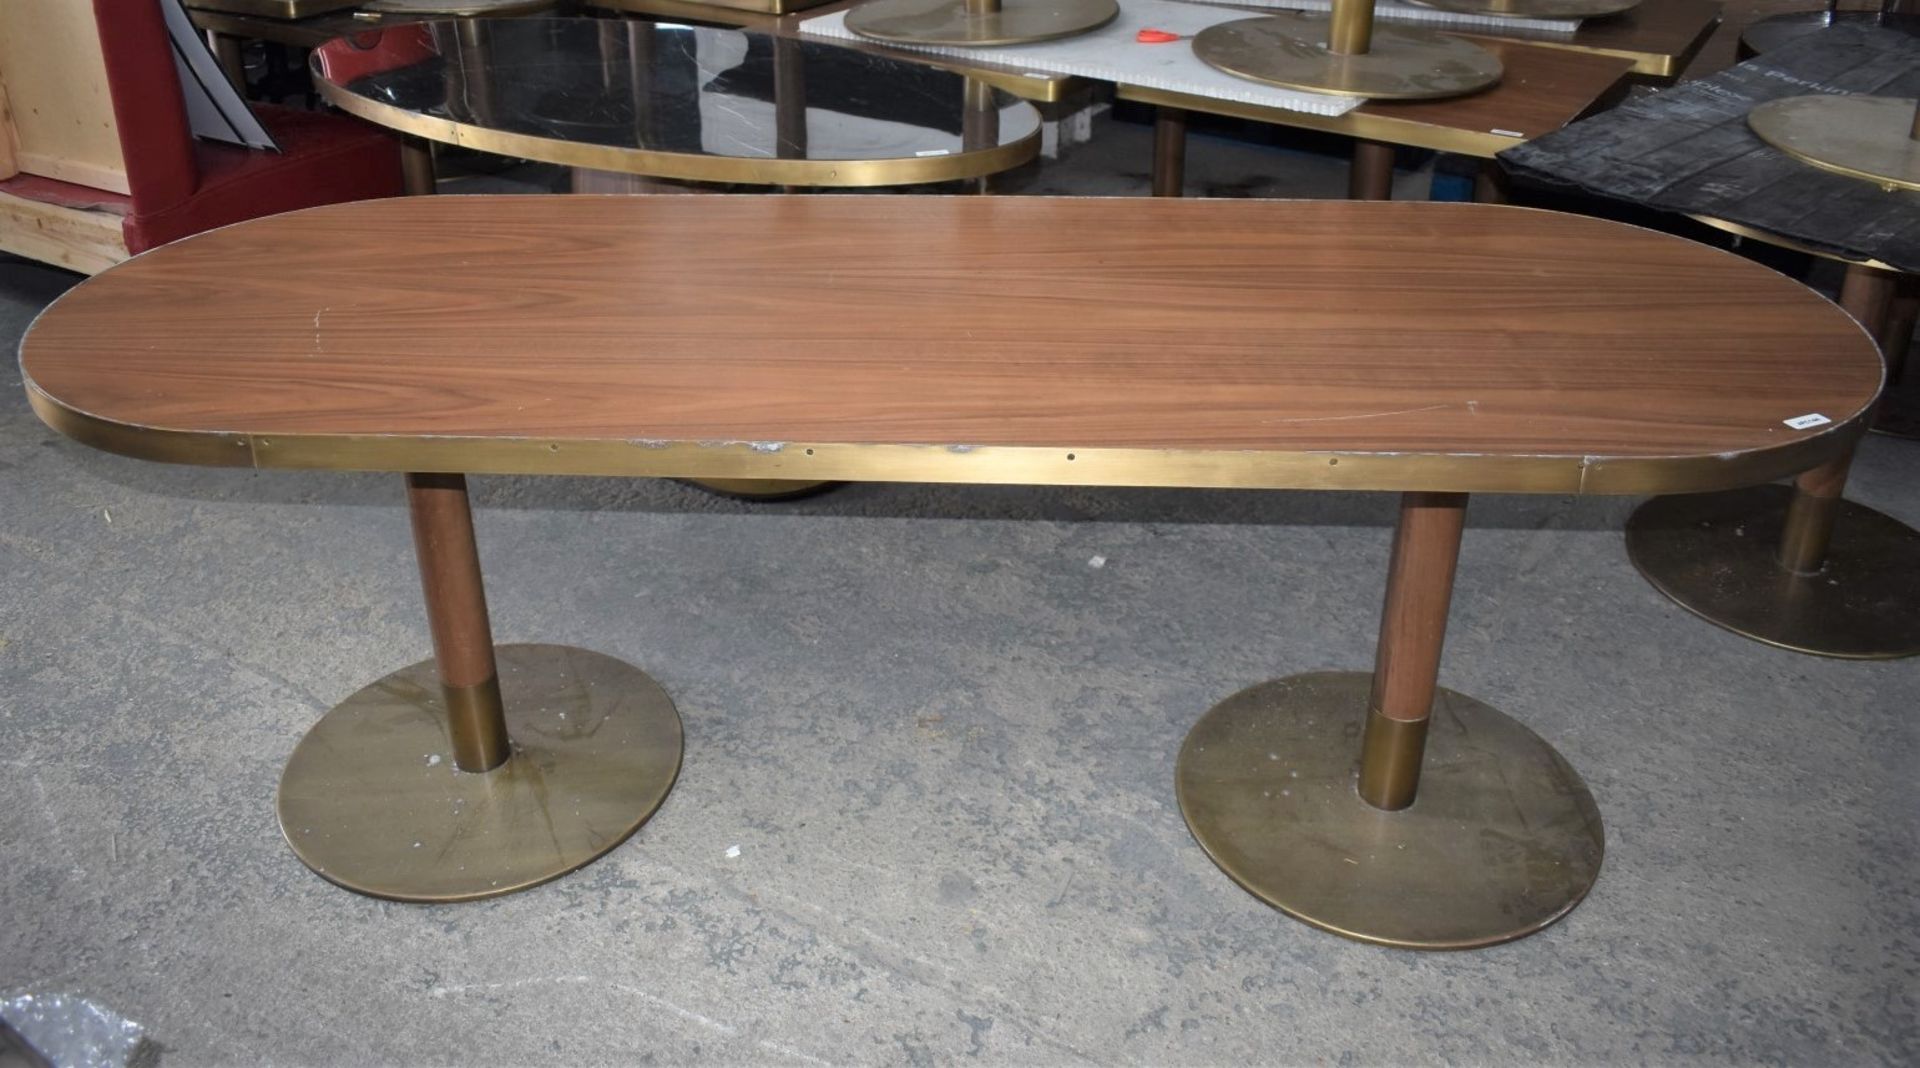 1 x Oval Banqueting Dining Table By AKP Design Athens - Walnut Top With Antique Brass Edging - Image 9 of 16